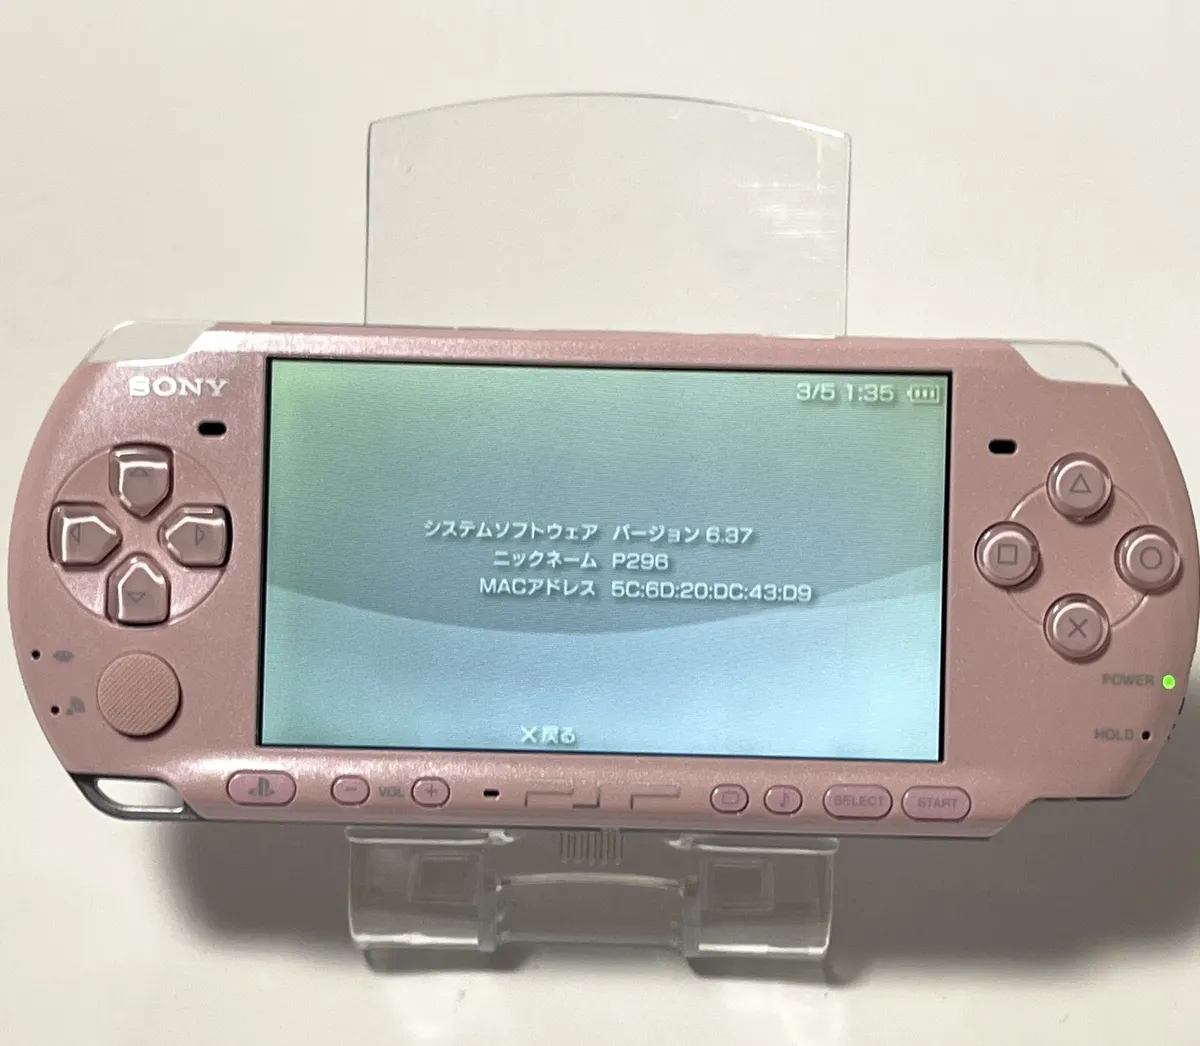 PlayStation Portable VALUE PACK sony PSP3000 Blossom Pink PSPJ-30019 Boxed  Japan